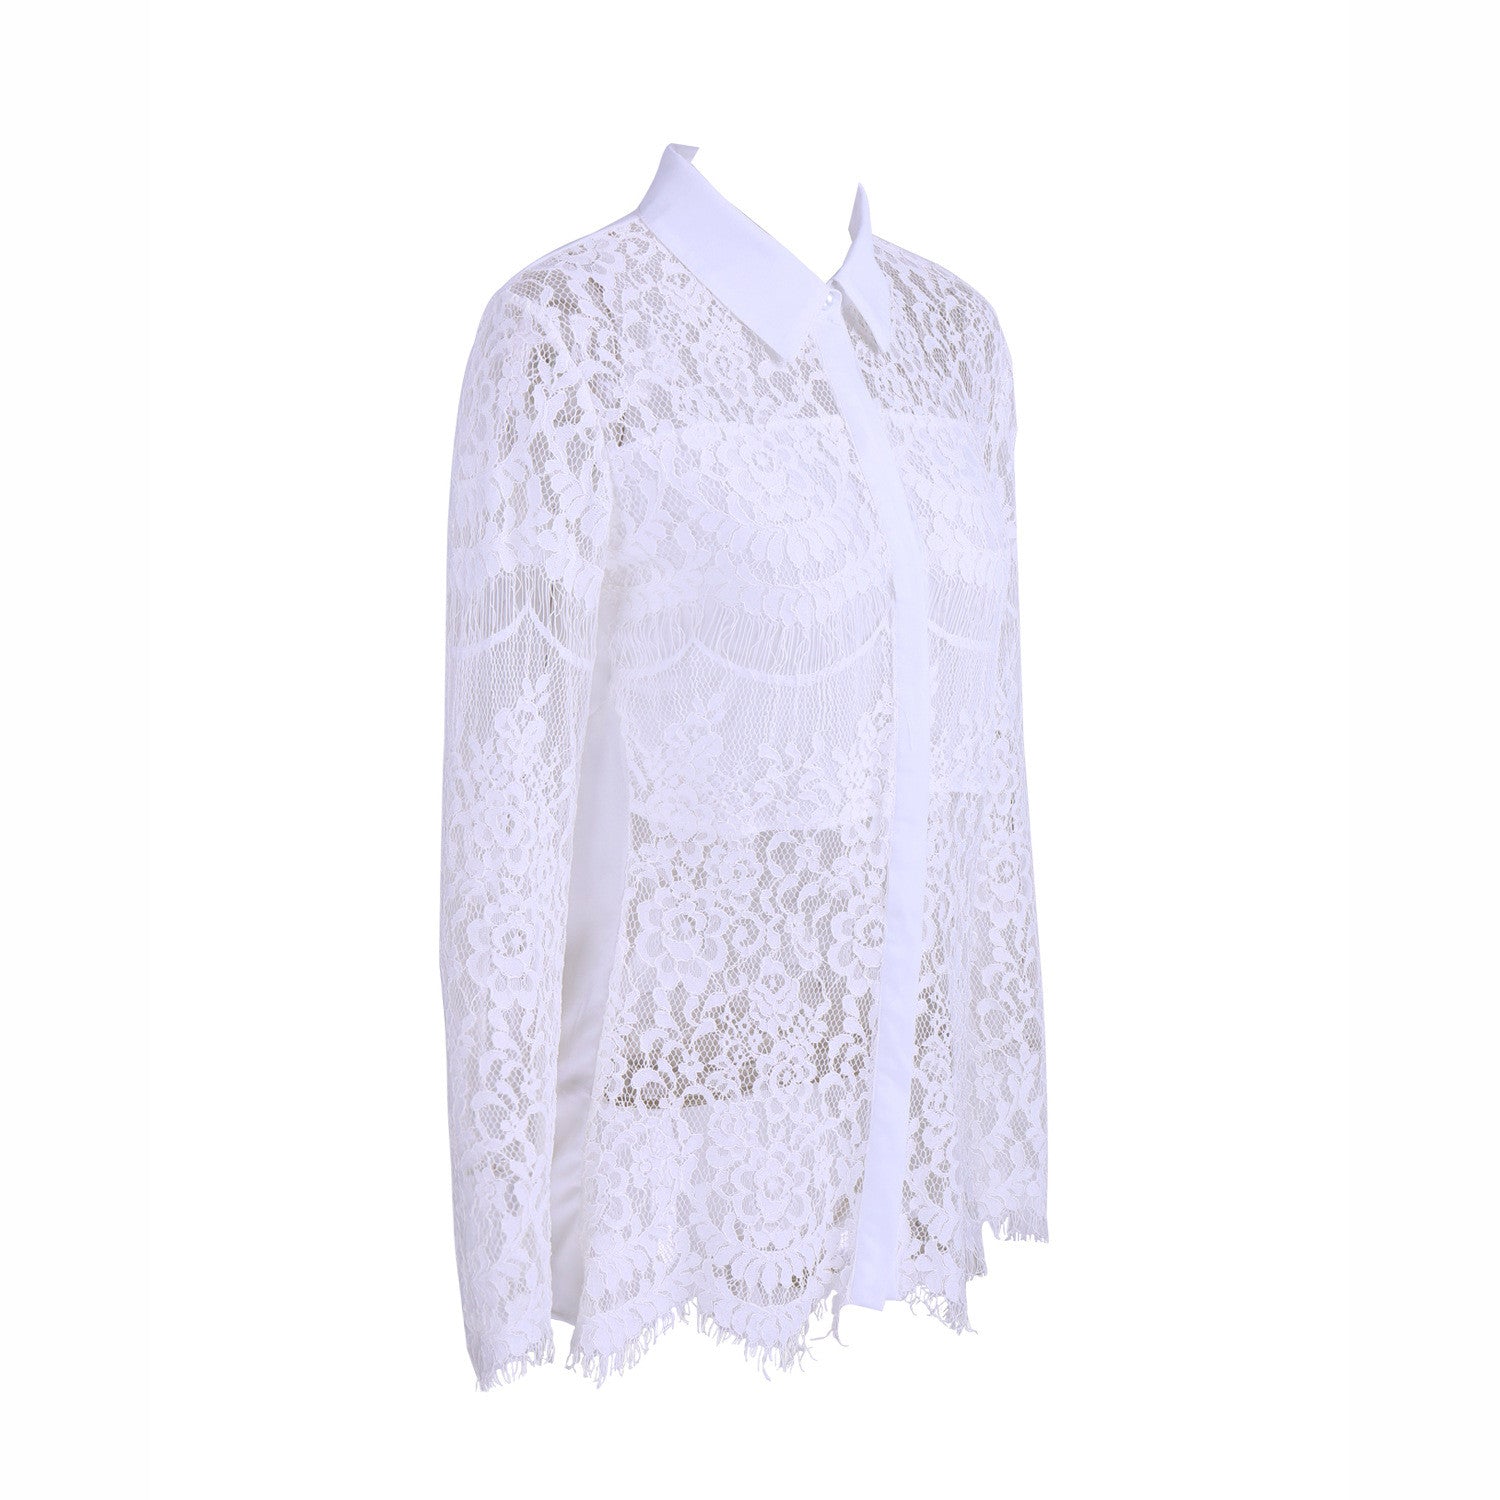 Hollow Out Lace Embroidery Flowers Splicing Fashion Shirt